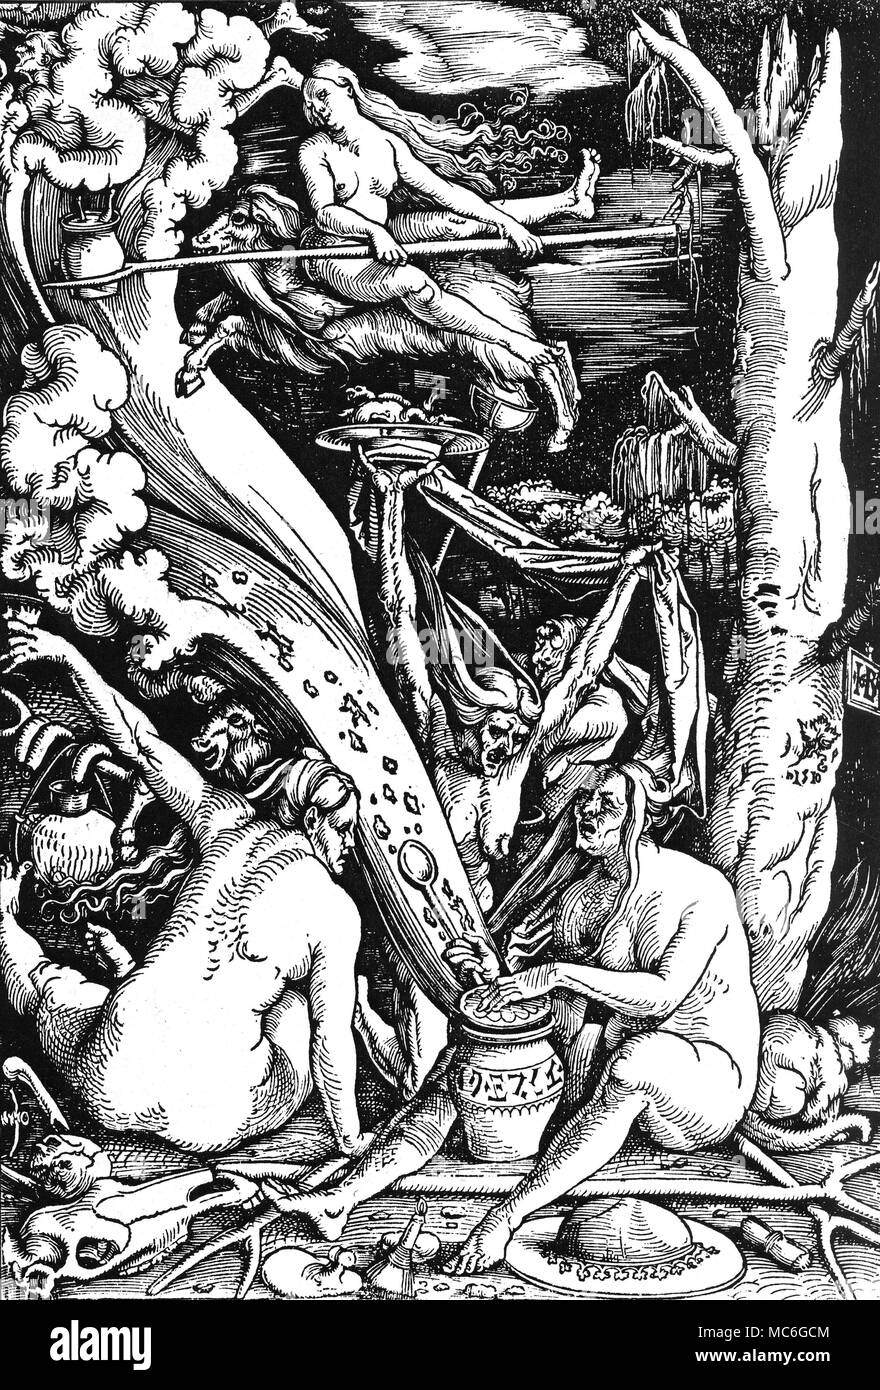 WITCHCRAFT - TRANSVECTING WITCHES 'The Witches' - woodcut by Hans Baldung Grien, 1510. Two witches are transvecting - one seemingly on a cloud, the other on the back of a goat (which is surely a devil in disguise). The witch in the foreground (right) is opening a witch-jar, from which stream all kinds of evil; the jar is inscribed with Hebrew-like letters, pointing to the fact that Jews were regarded little more highly than witches, in the early 16th century. Behind this witch is a cat familiar. In the immediate foreground is a magic mirror, or scrying mirror, used for looking into the f Stock Photo